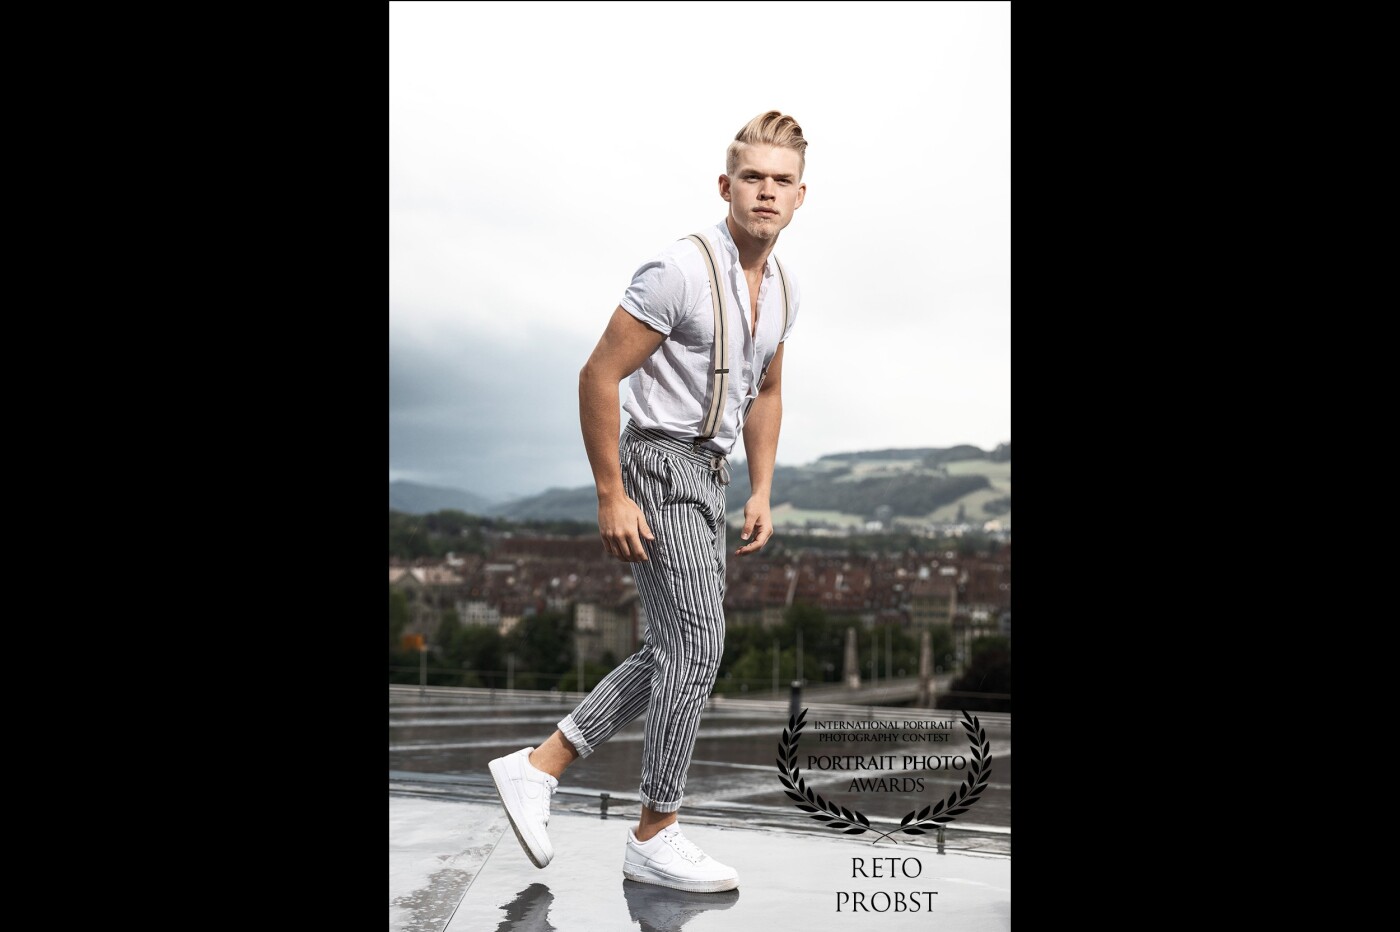 I made this picture of Jan on a rainy day. We were allowed on the roof of the Kursaal Bern. It was great shooting and I look forward to more with him.<br />
Camera: Canon EOS 5D Mark IV / 24-70mm f2.8